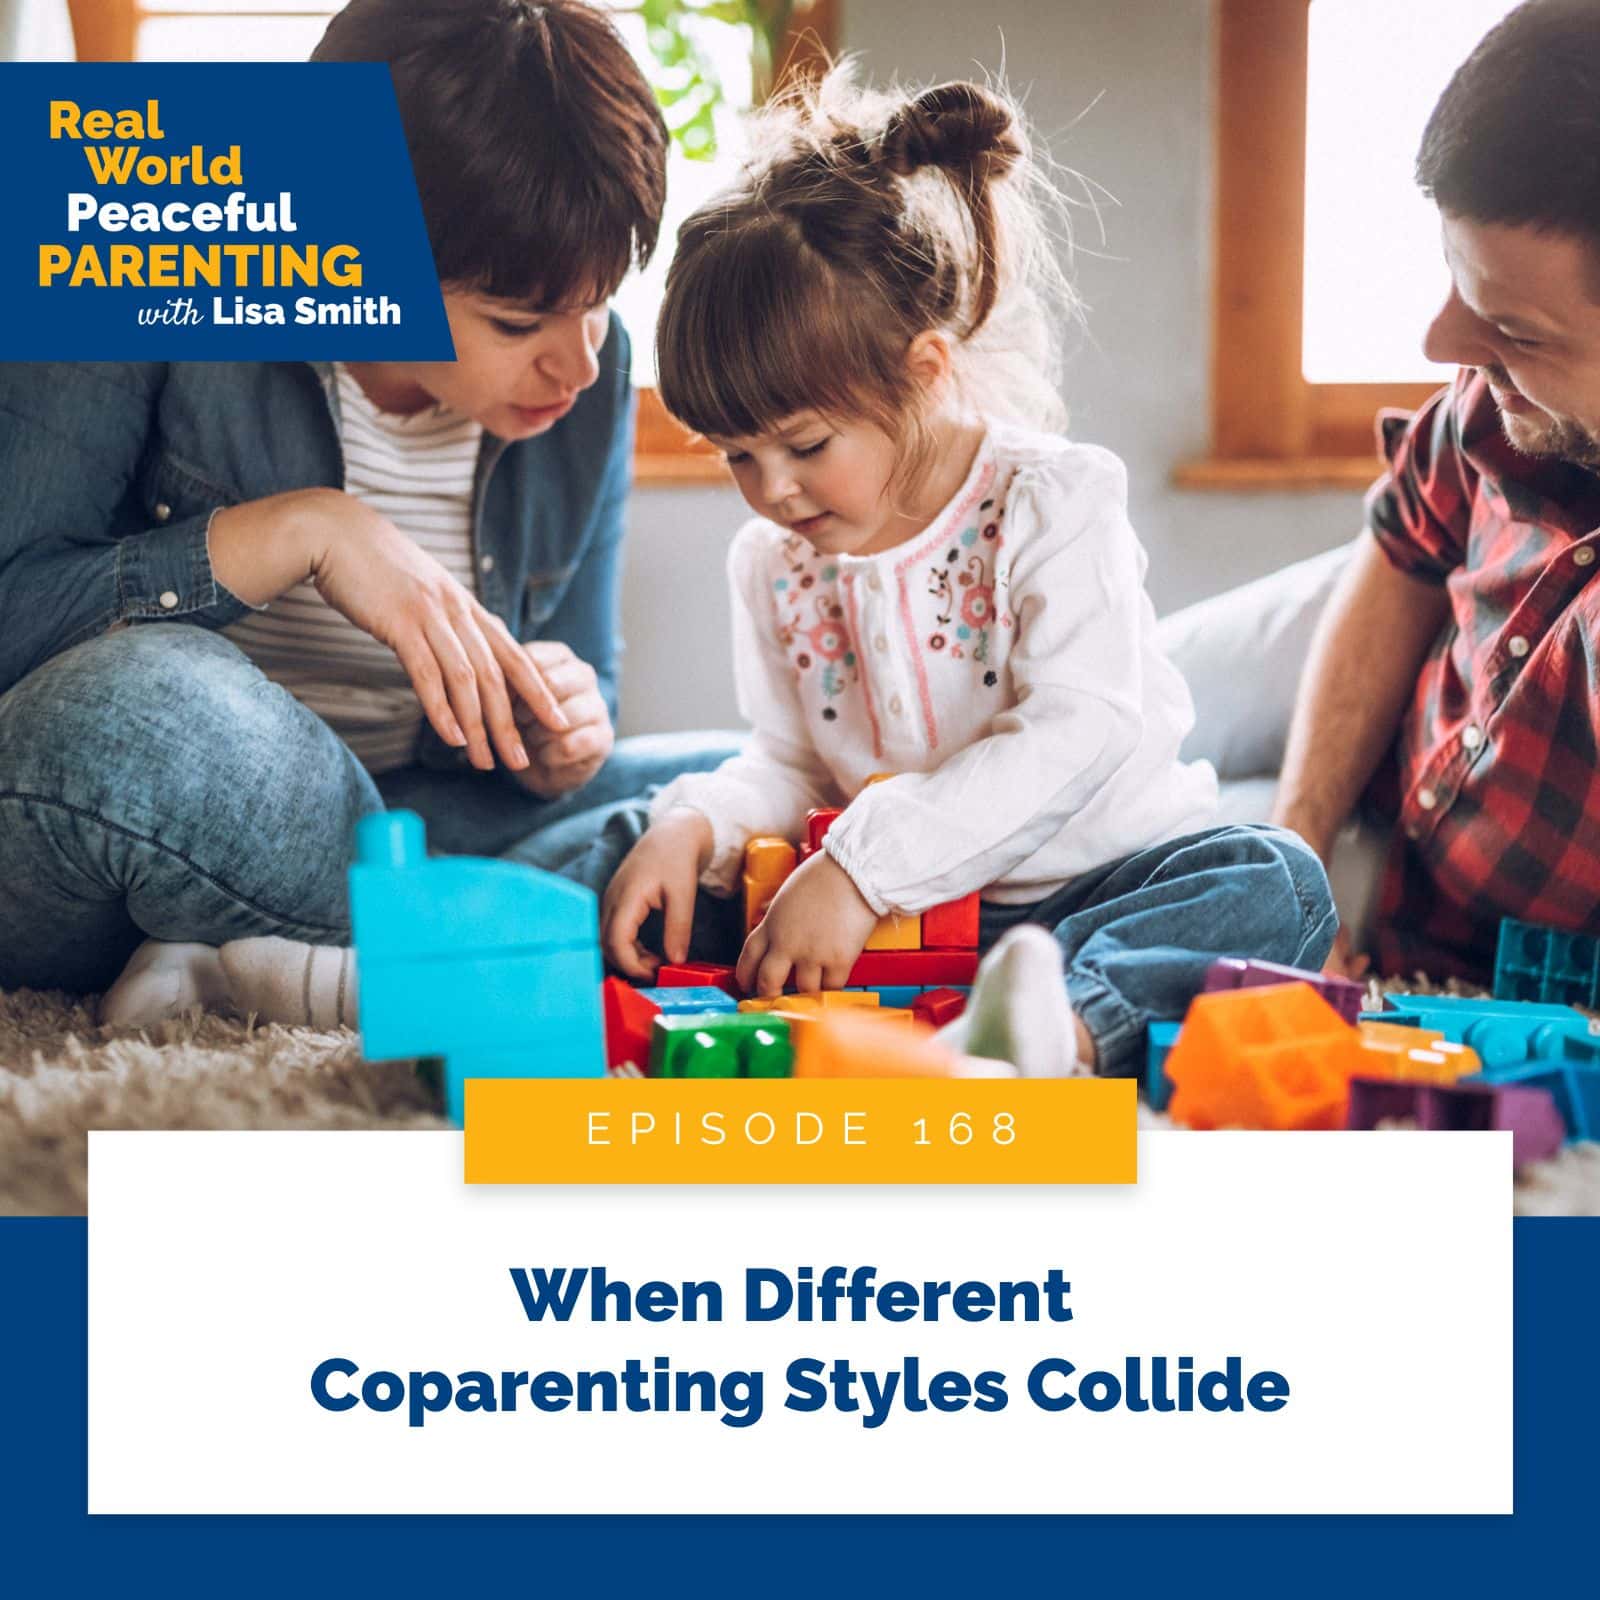 Real World Peaceful Parenting with Lisa Smith | When Different Coparenting Styles Collide